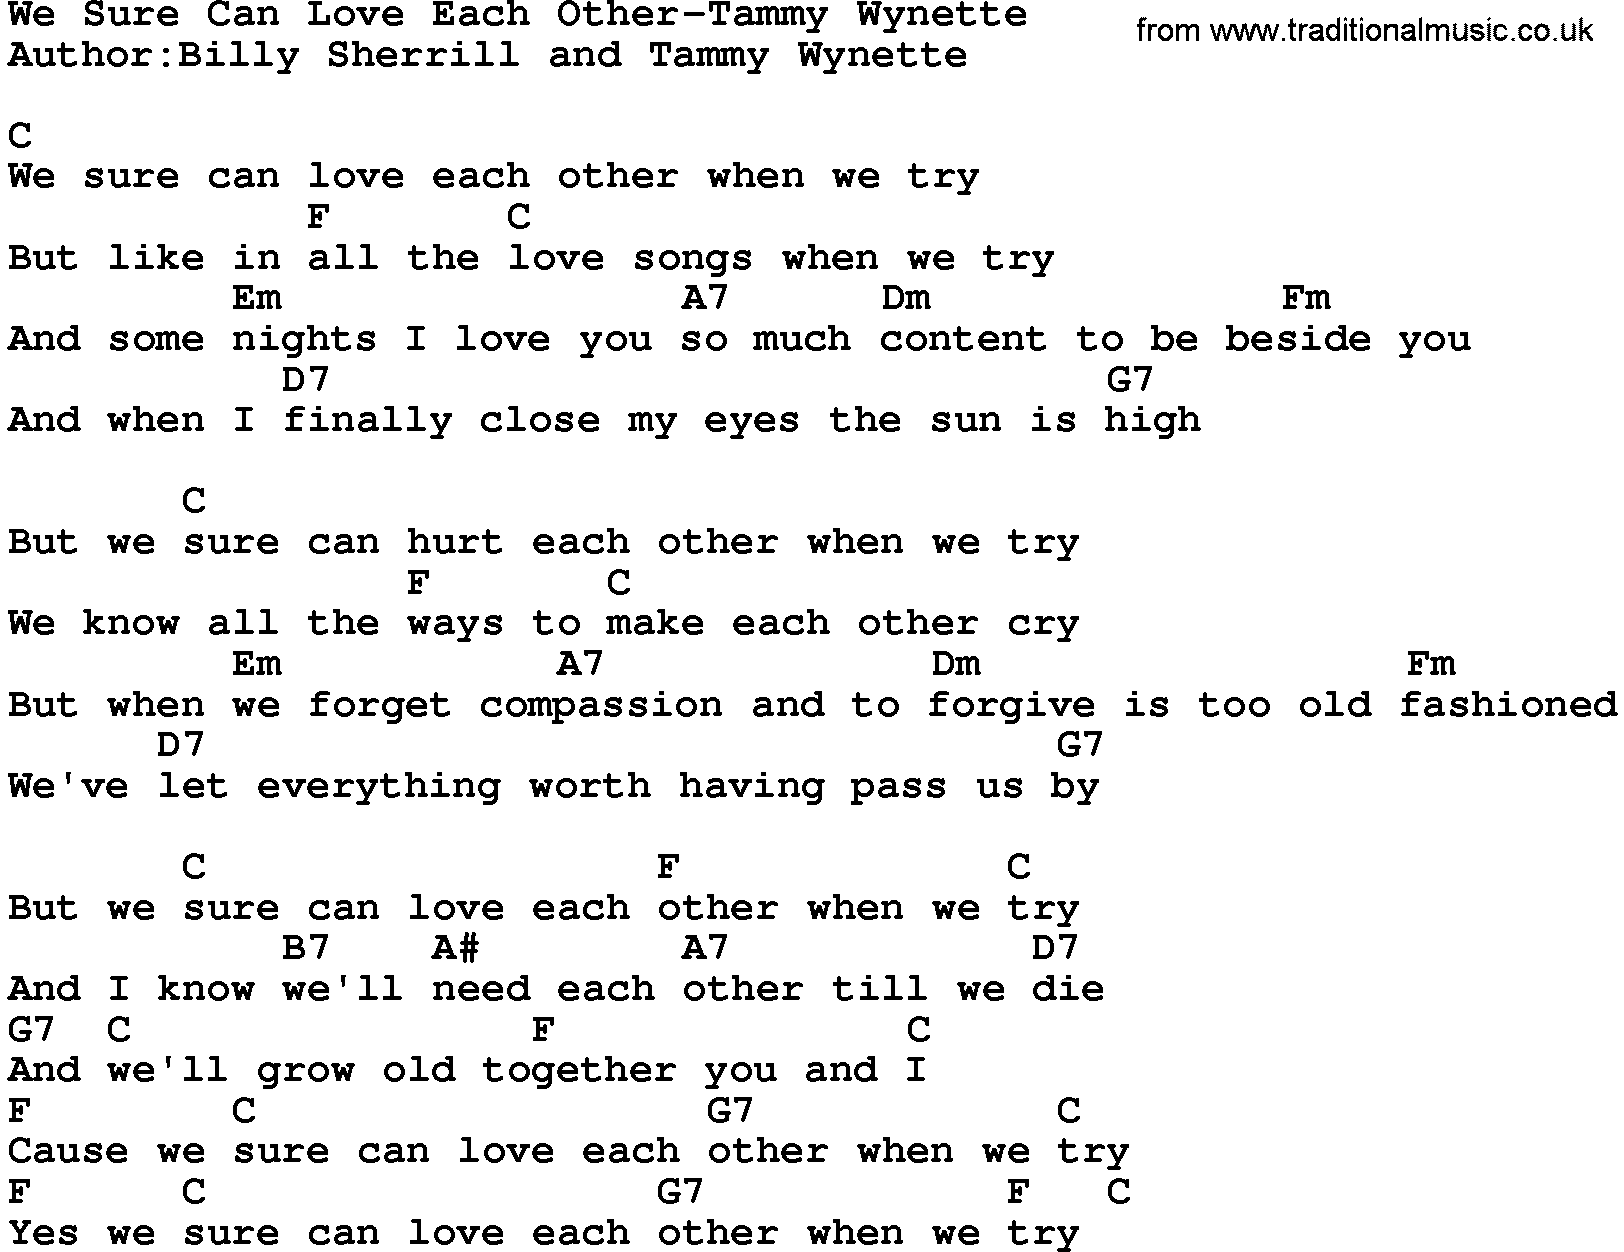 Country music song: We Sure Can Love Each Other-Tammy Wynette lyrics and chords